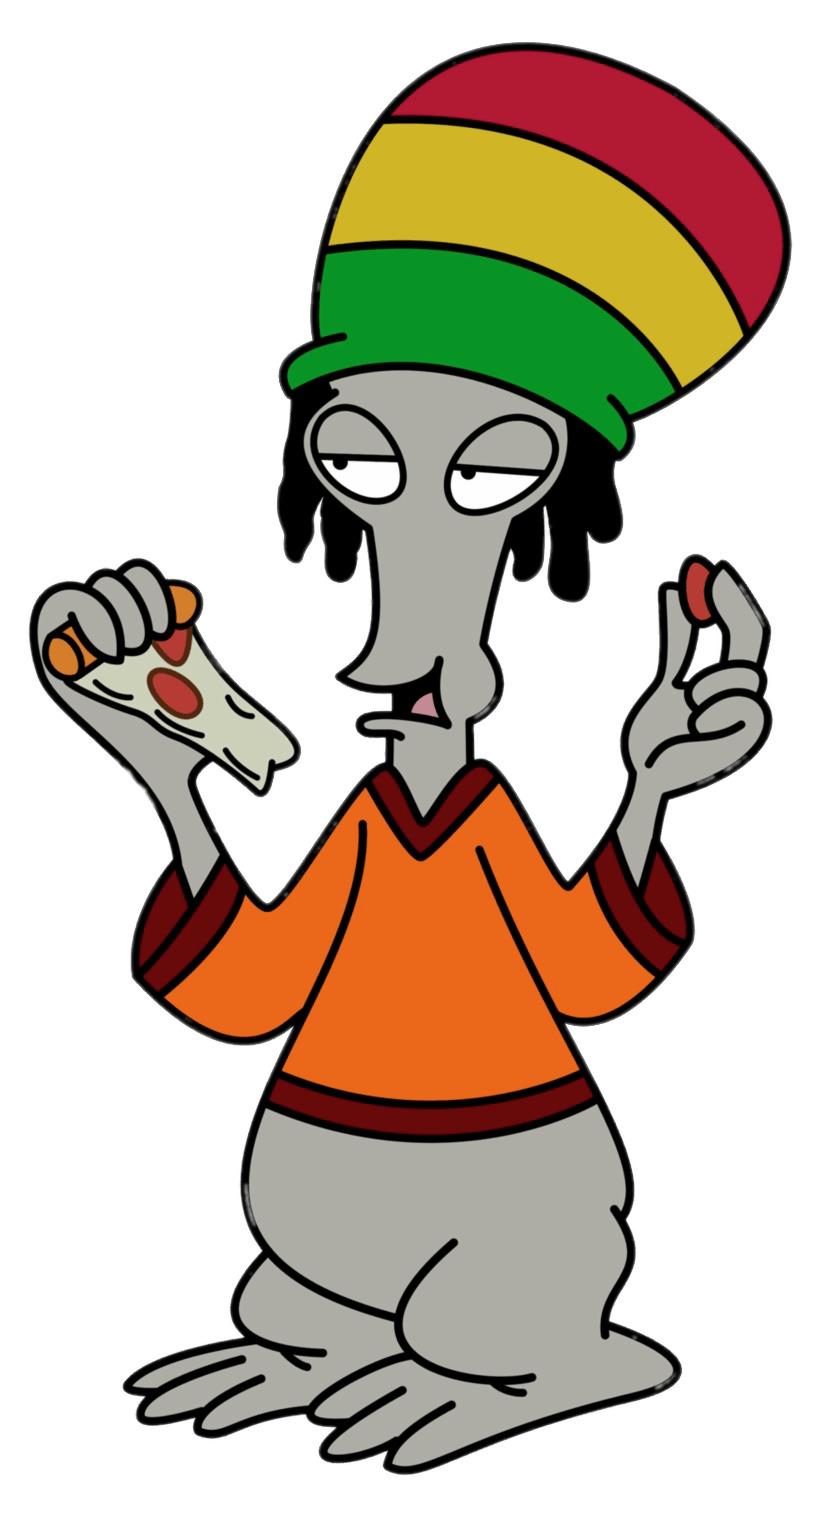 American Dad! Character Roger the Alien Jamaican Outfit png transparent